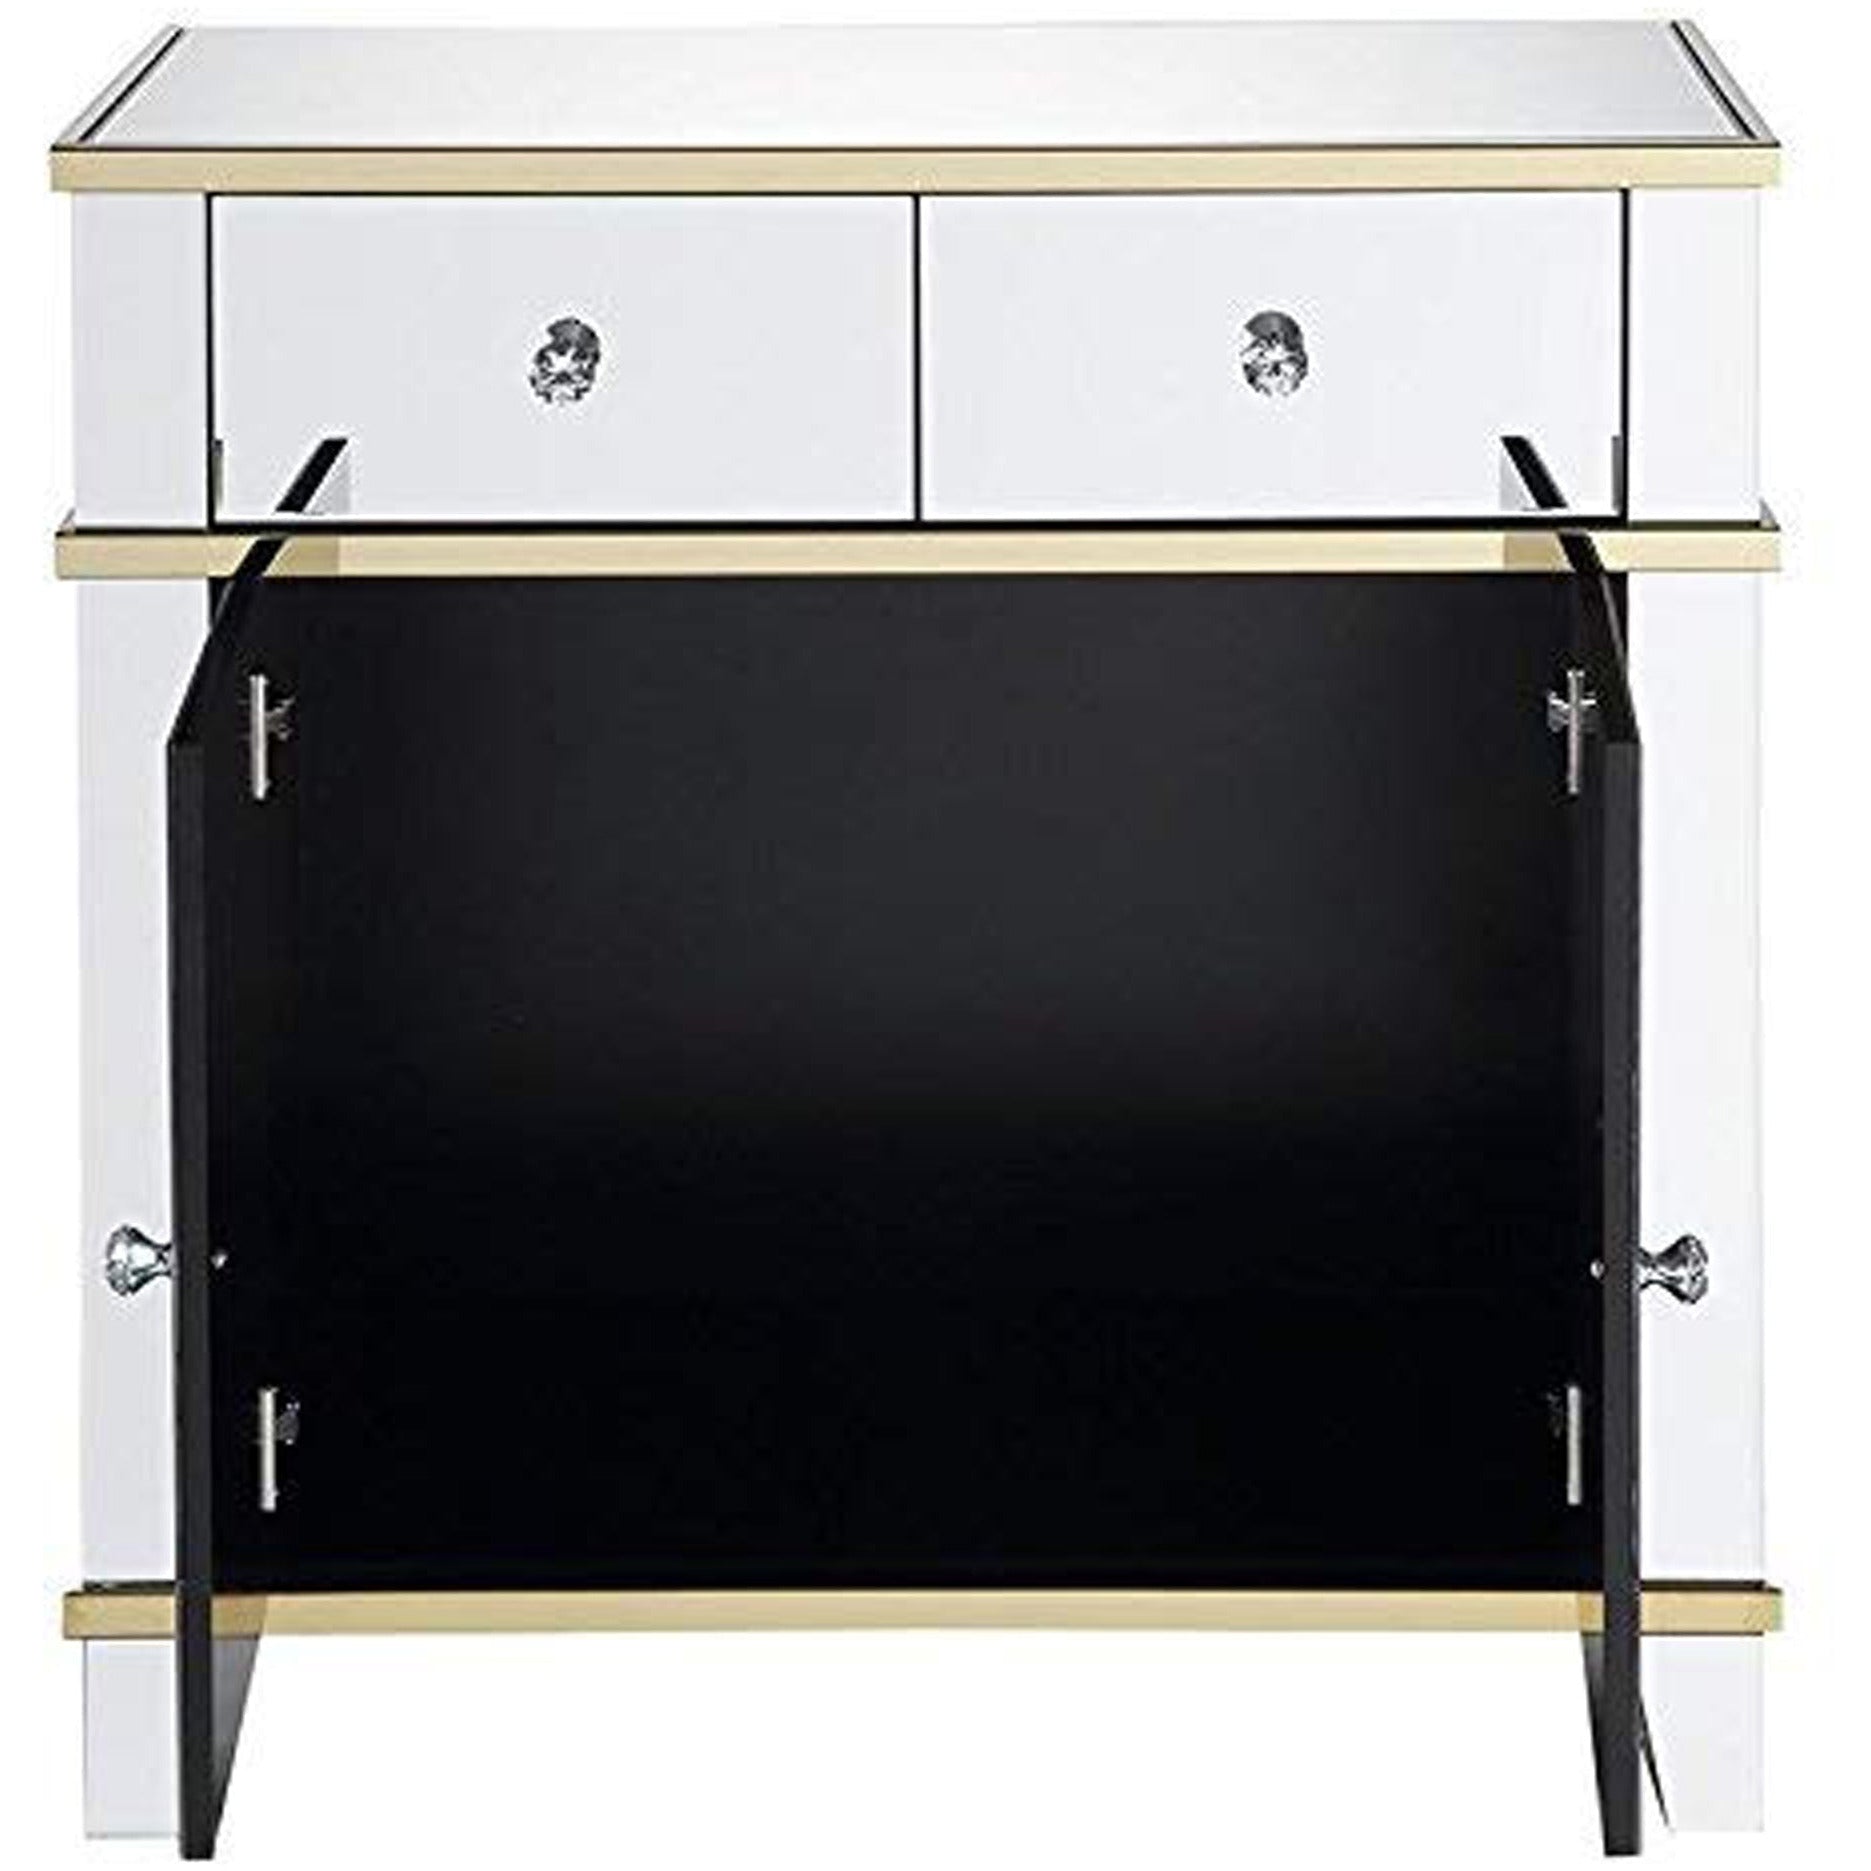 Benzara BM184774 31.89" 2 Drawer Mirrored Console Table with Golden Trim Accents